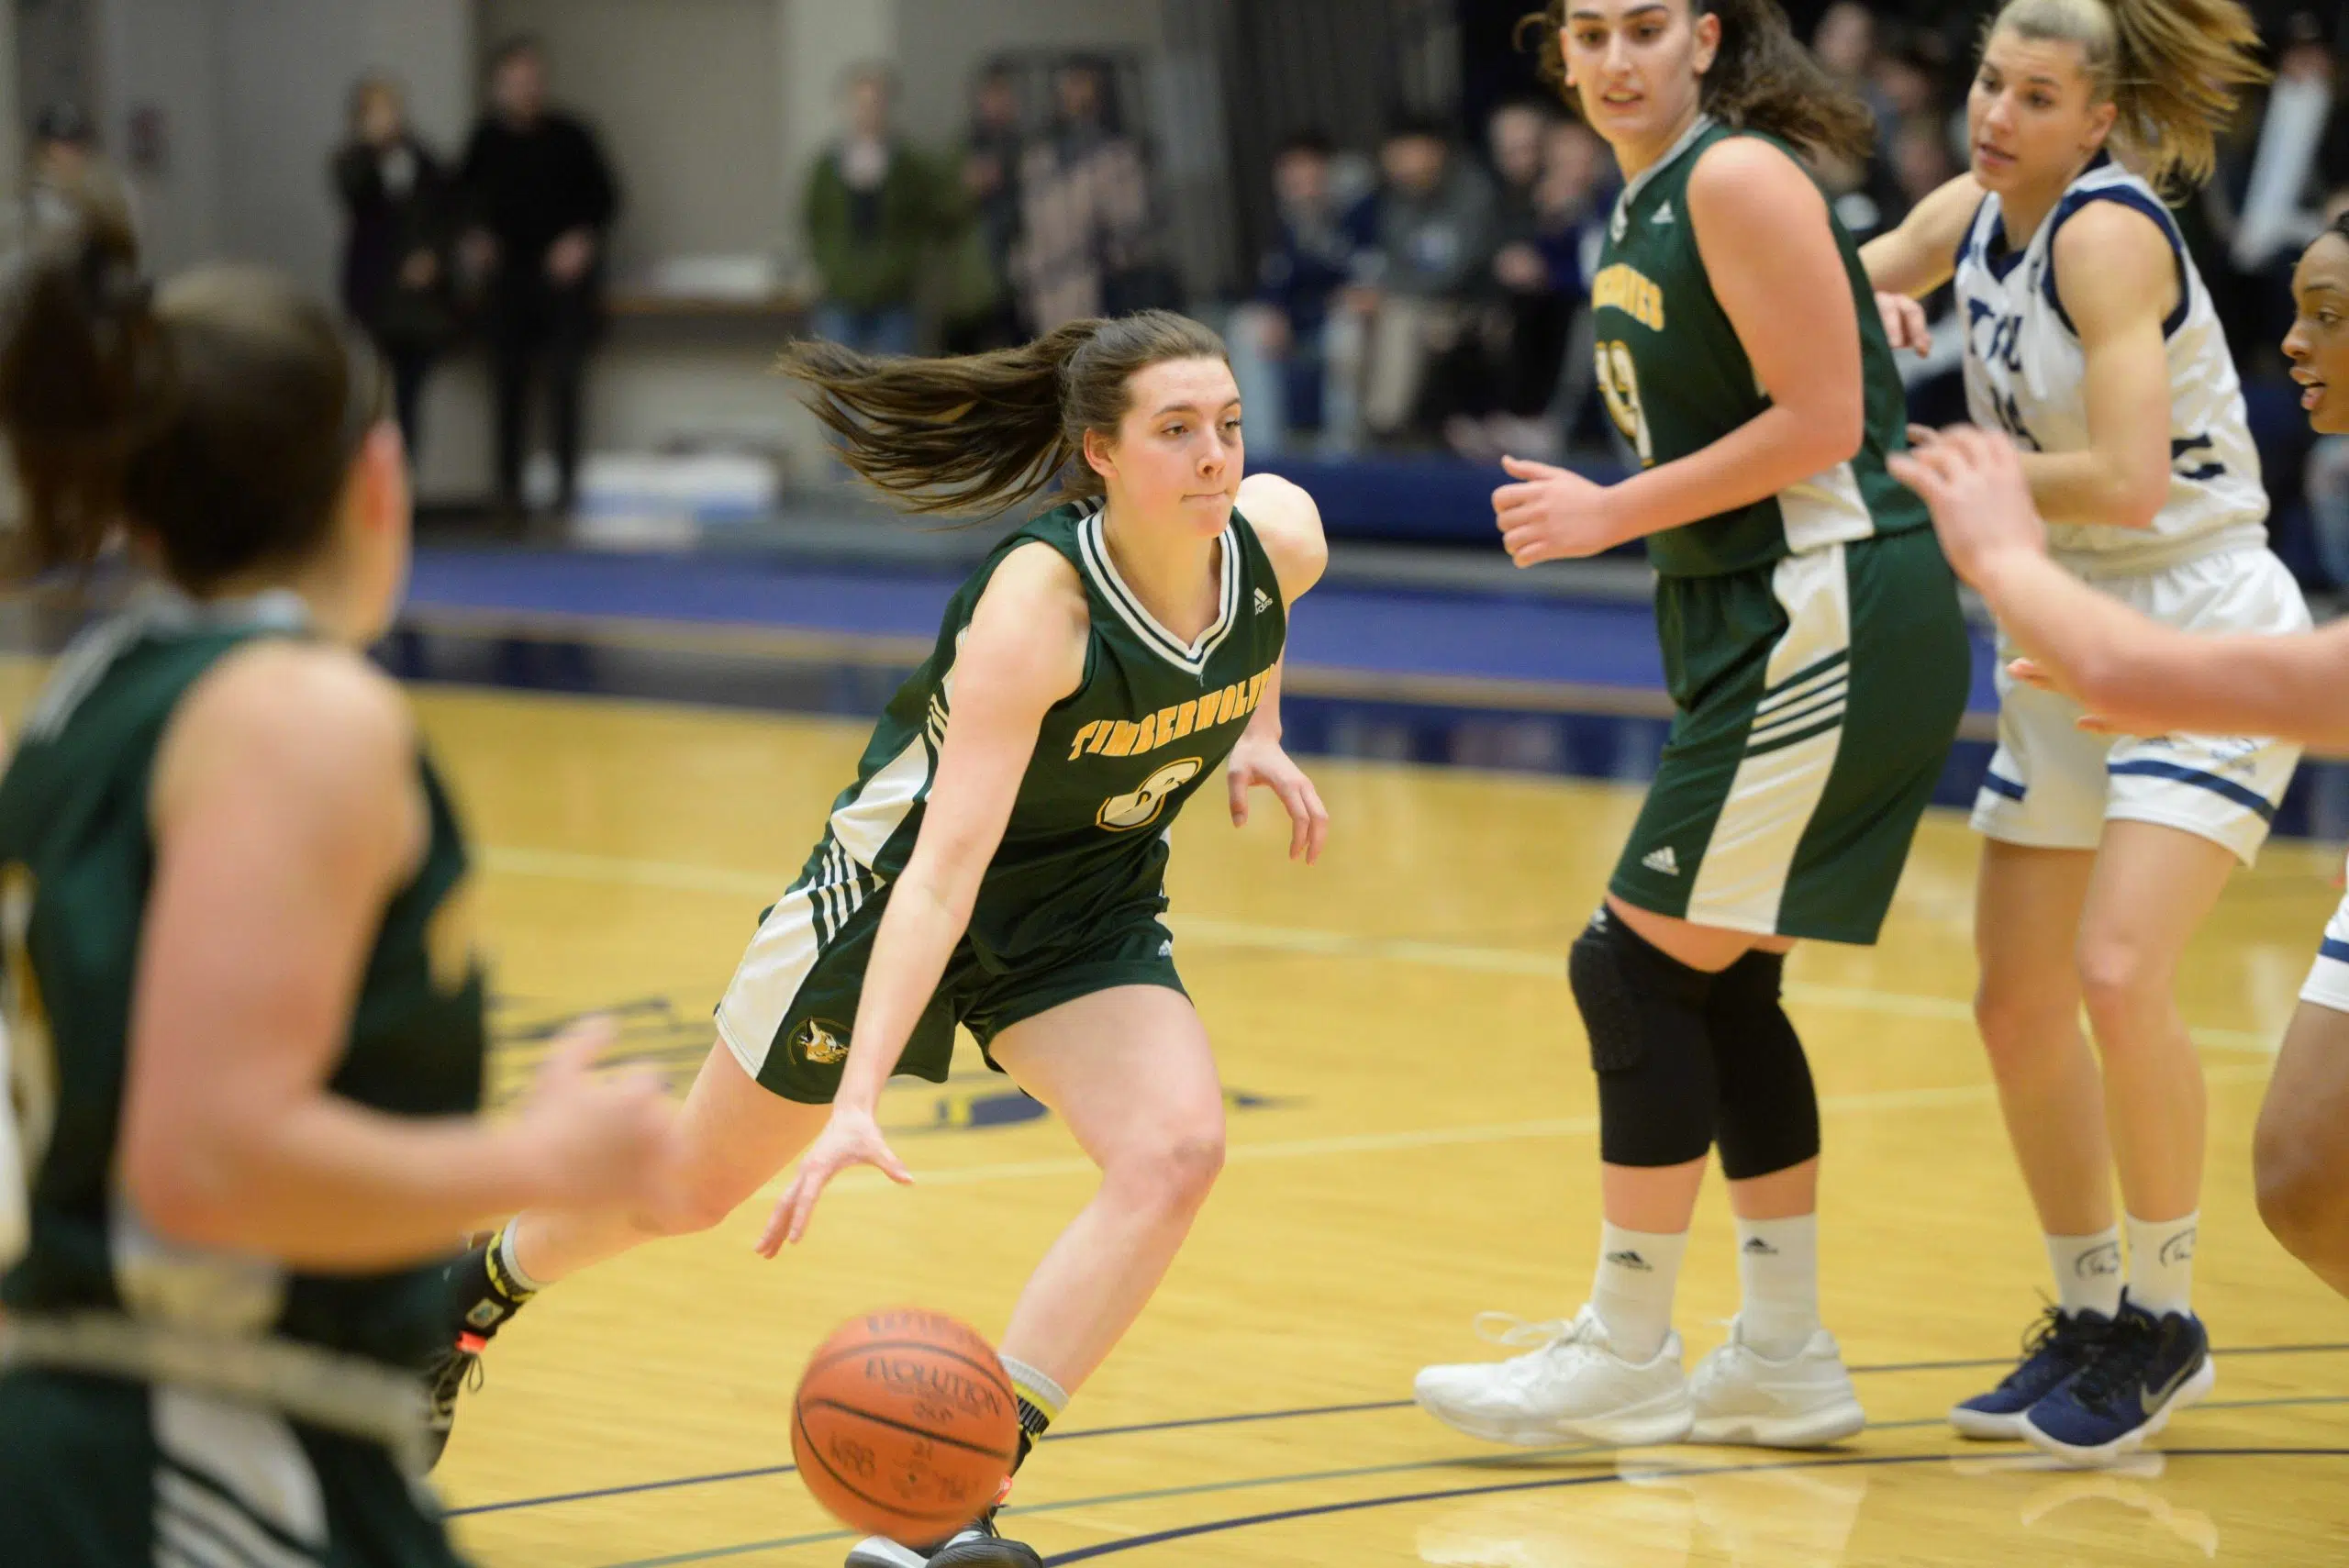 TWolves earn firstever Canada West playoff win CKPGToday.ca